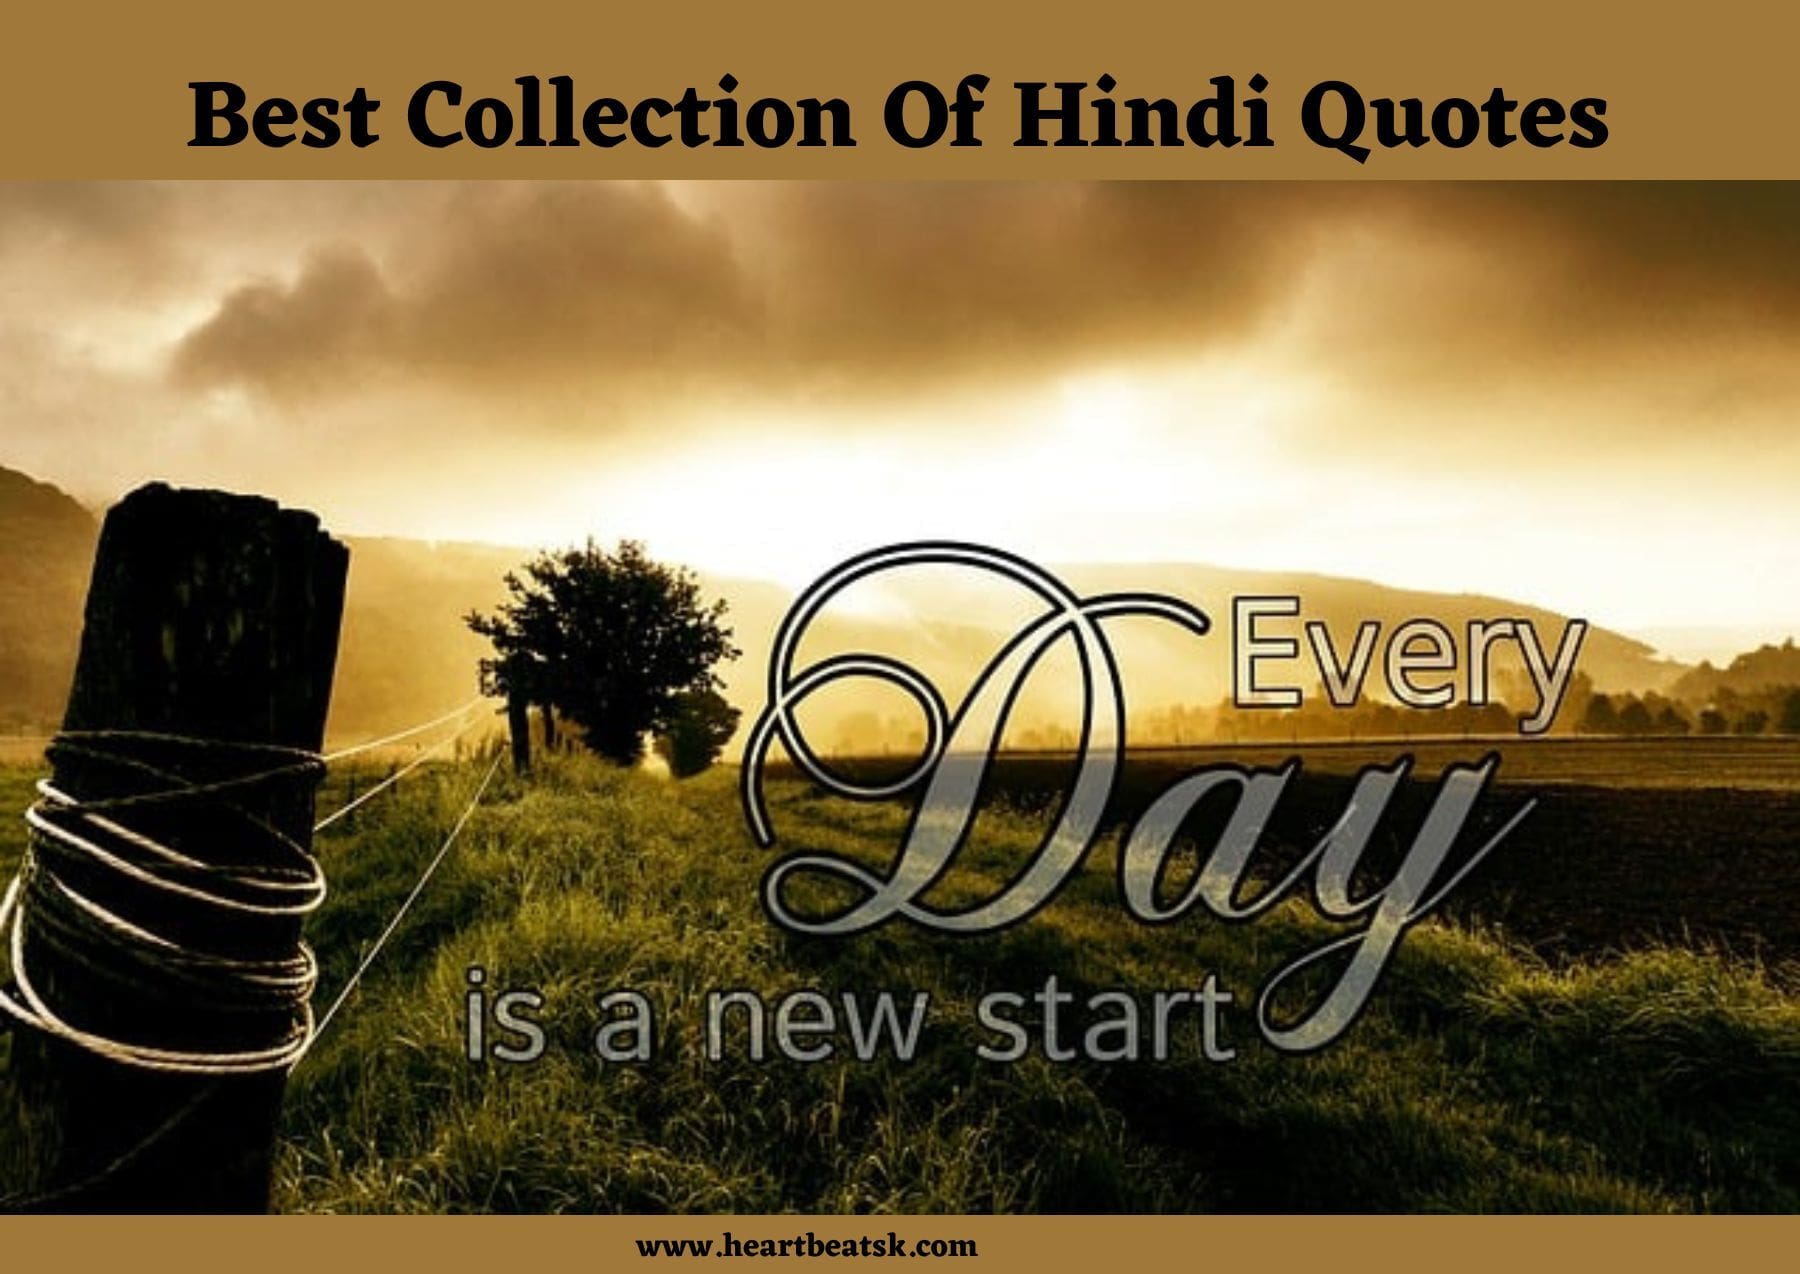 Best Collection Of Hindi Quotes